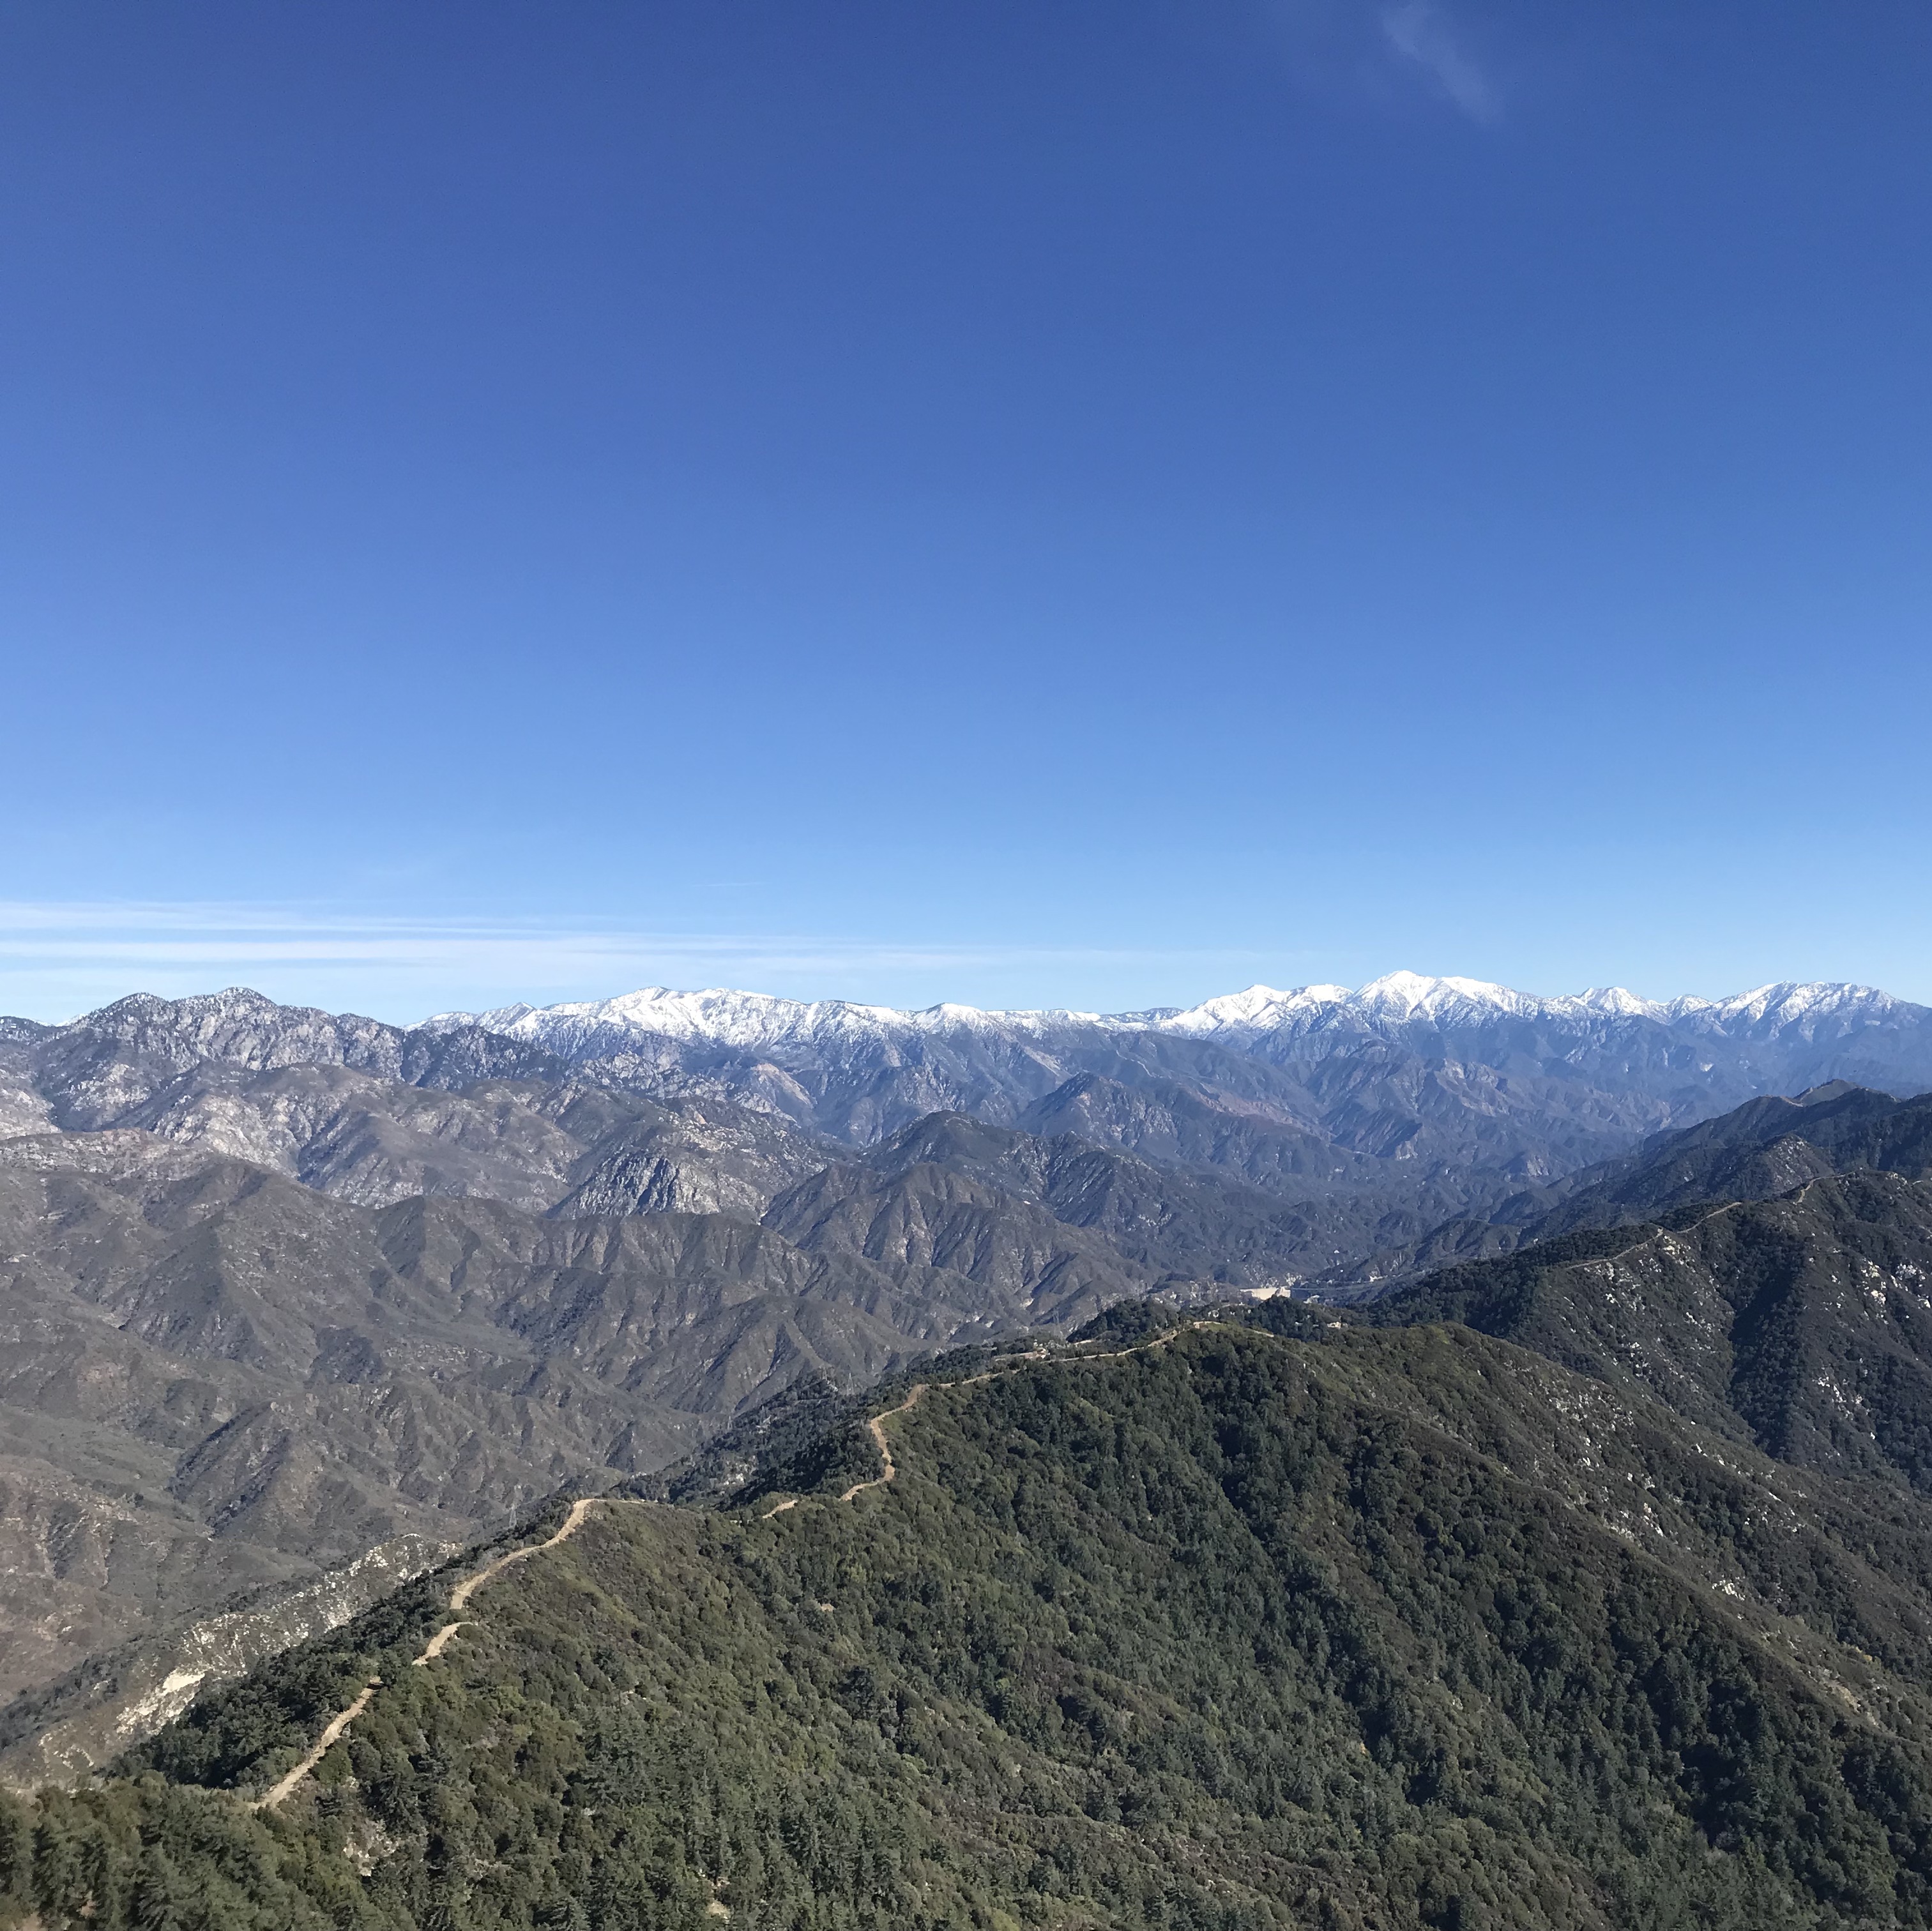 The mountainous view from Mount Wilson Observatory, CA.